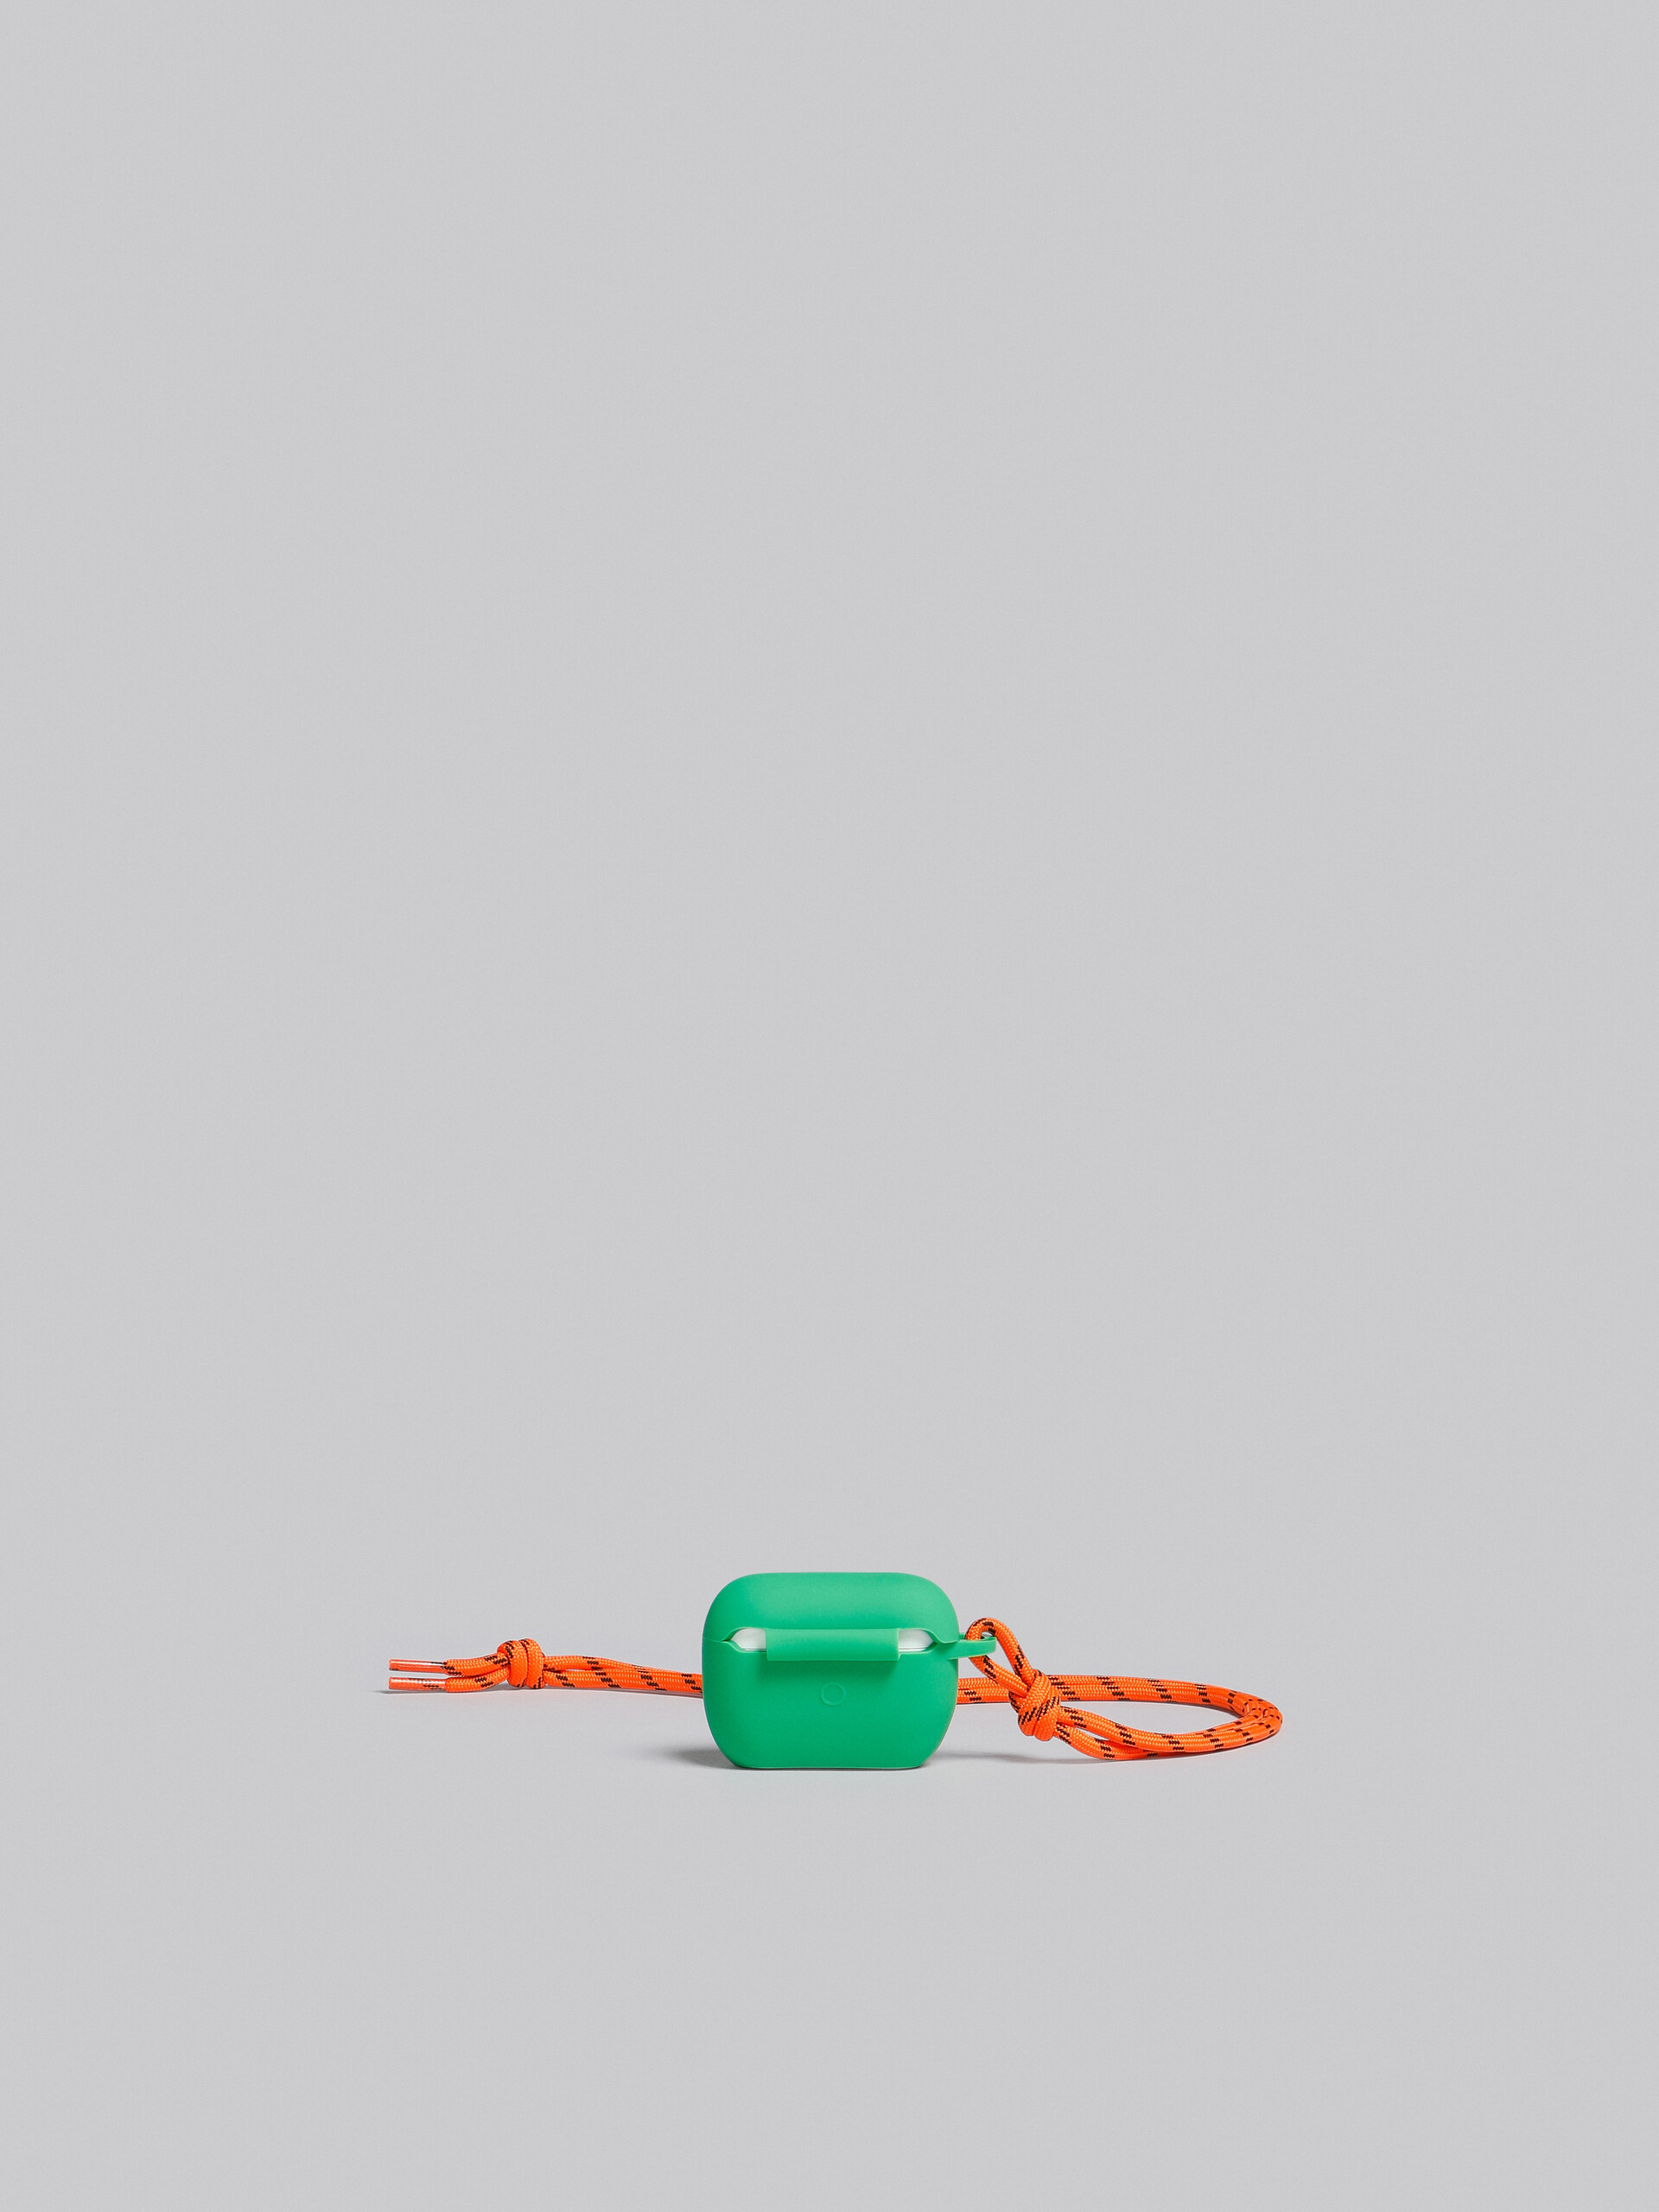 Marni x No Vacancy Inn - Green and orange Airpods case - Other accessories - Image 2